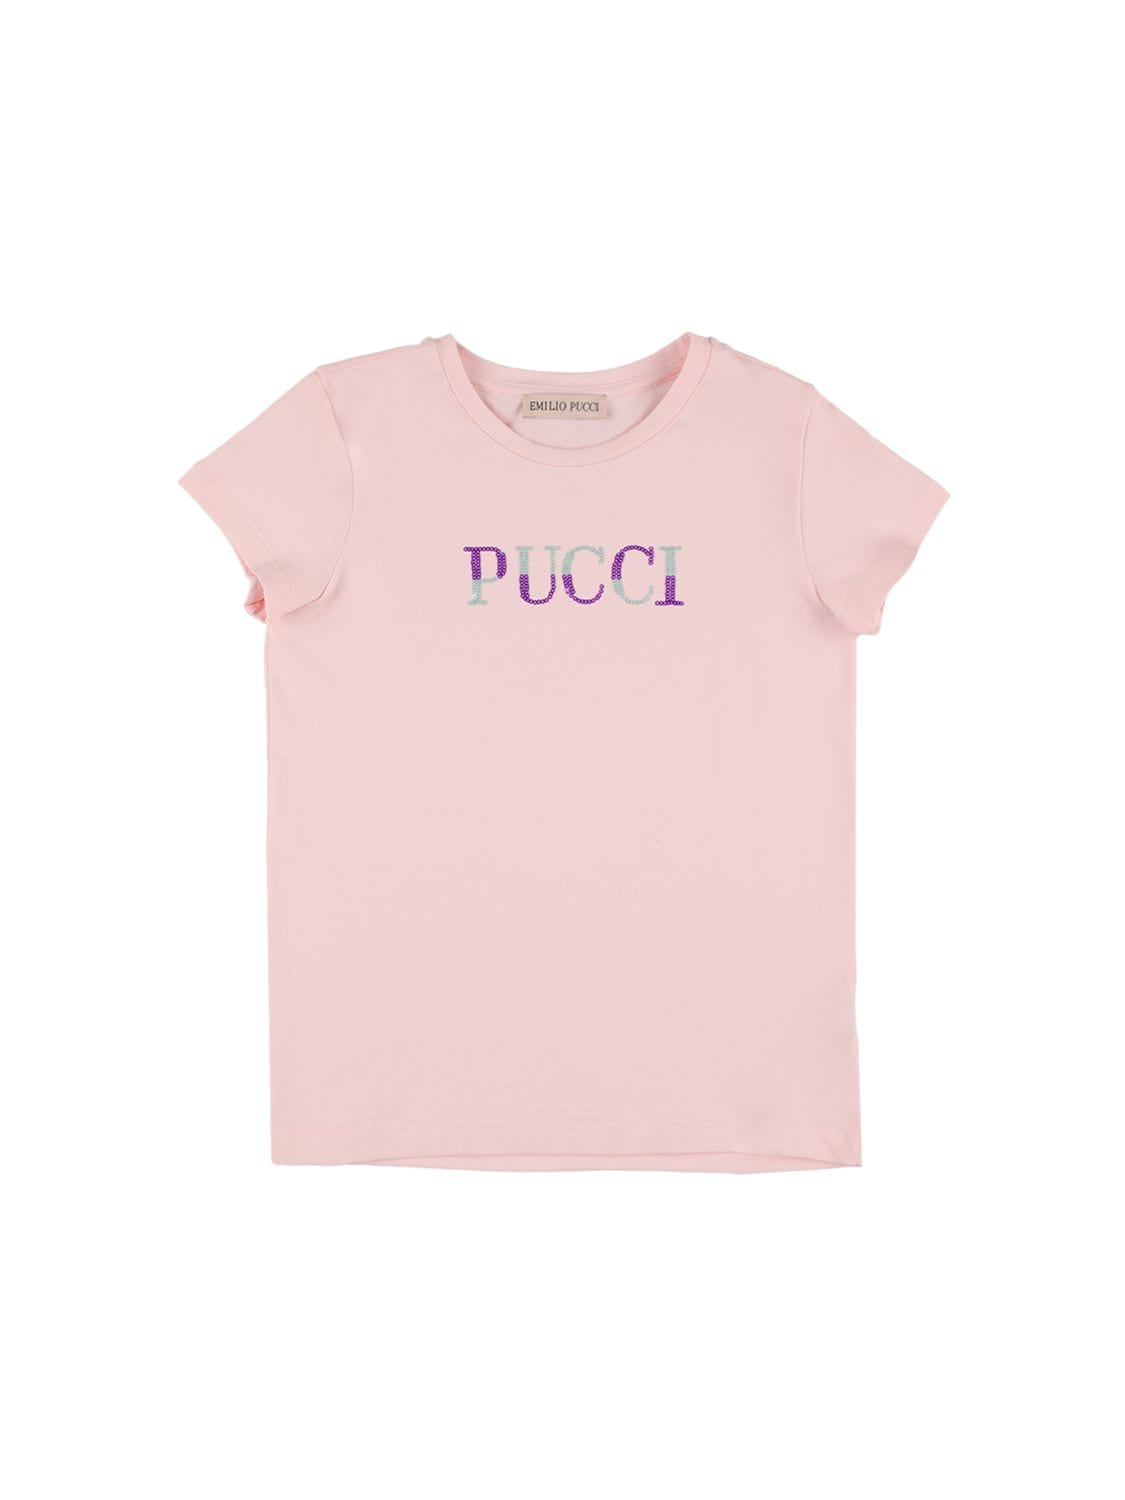 Emilio Pucci Kids' Sequined Logo Cotton Jersey T-shirt In Pink